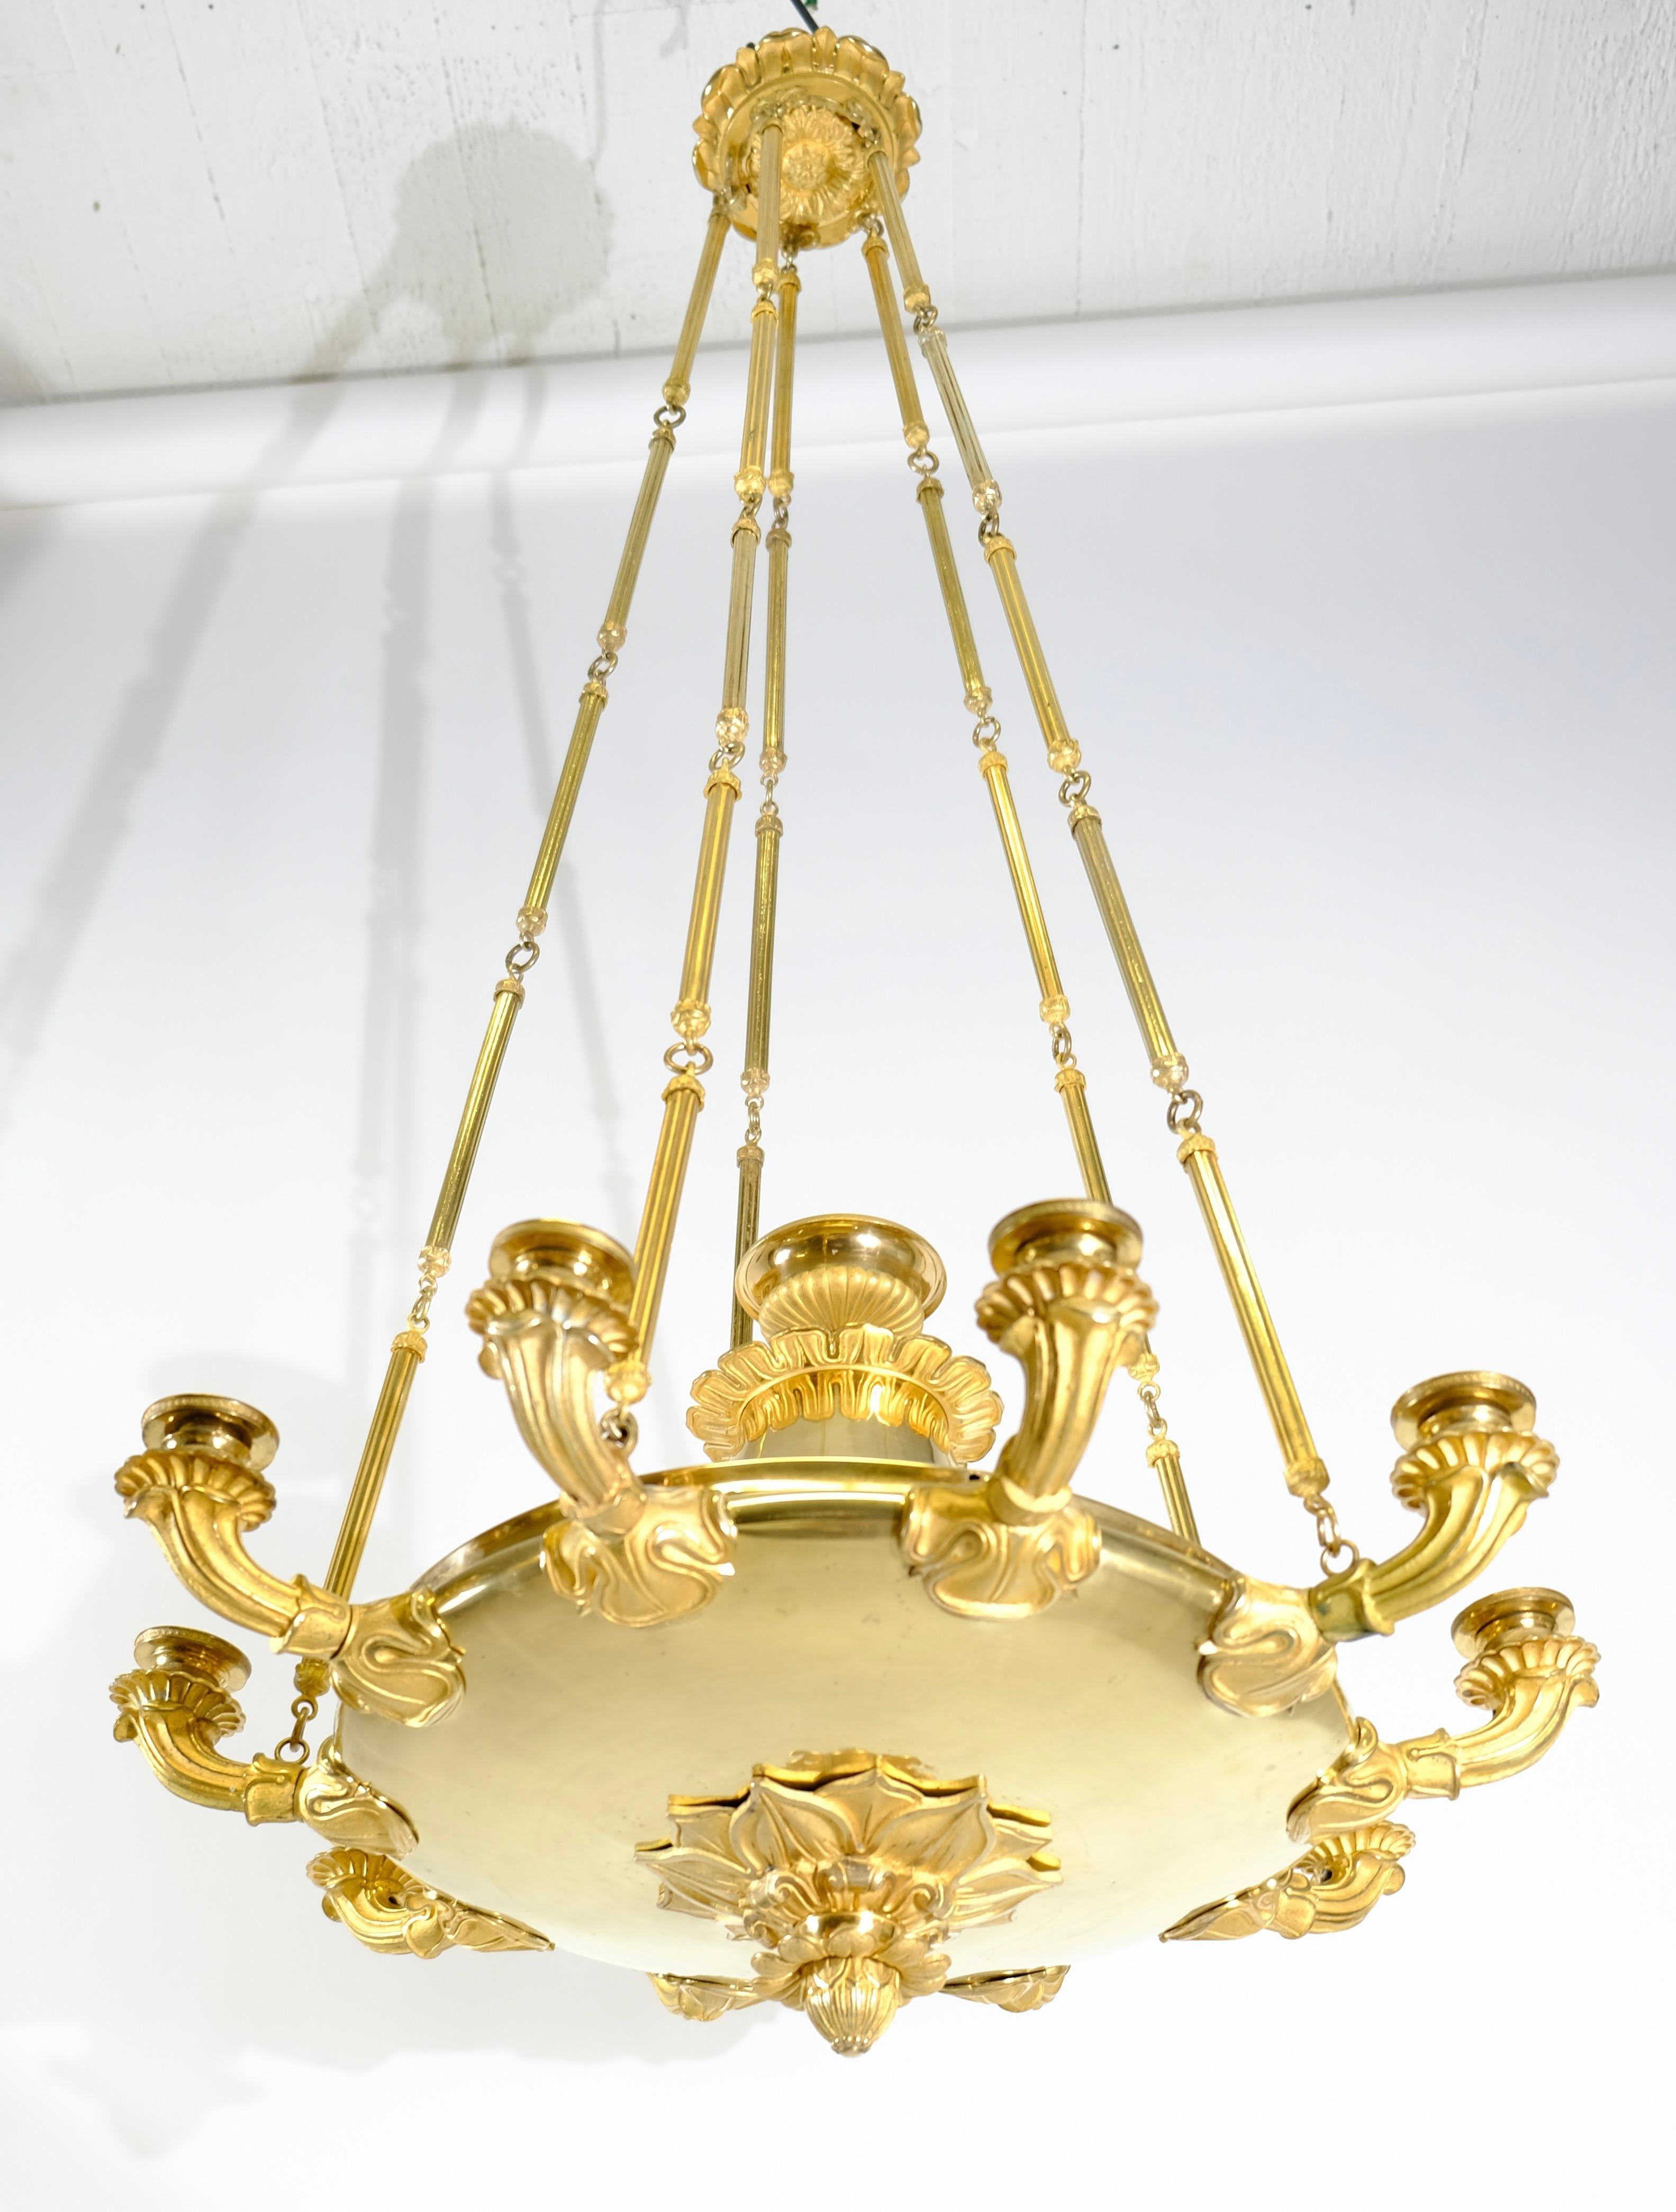 Large Empire Chandelier with Ten Candleholders in great condition. Ca 1820. For Sale 1